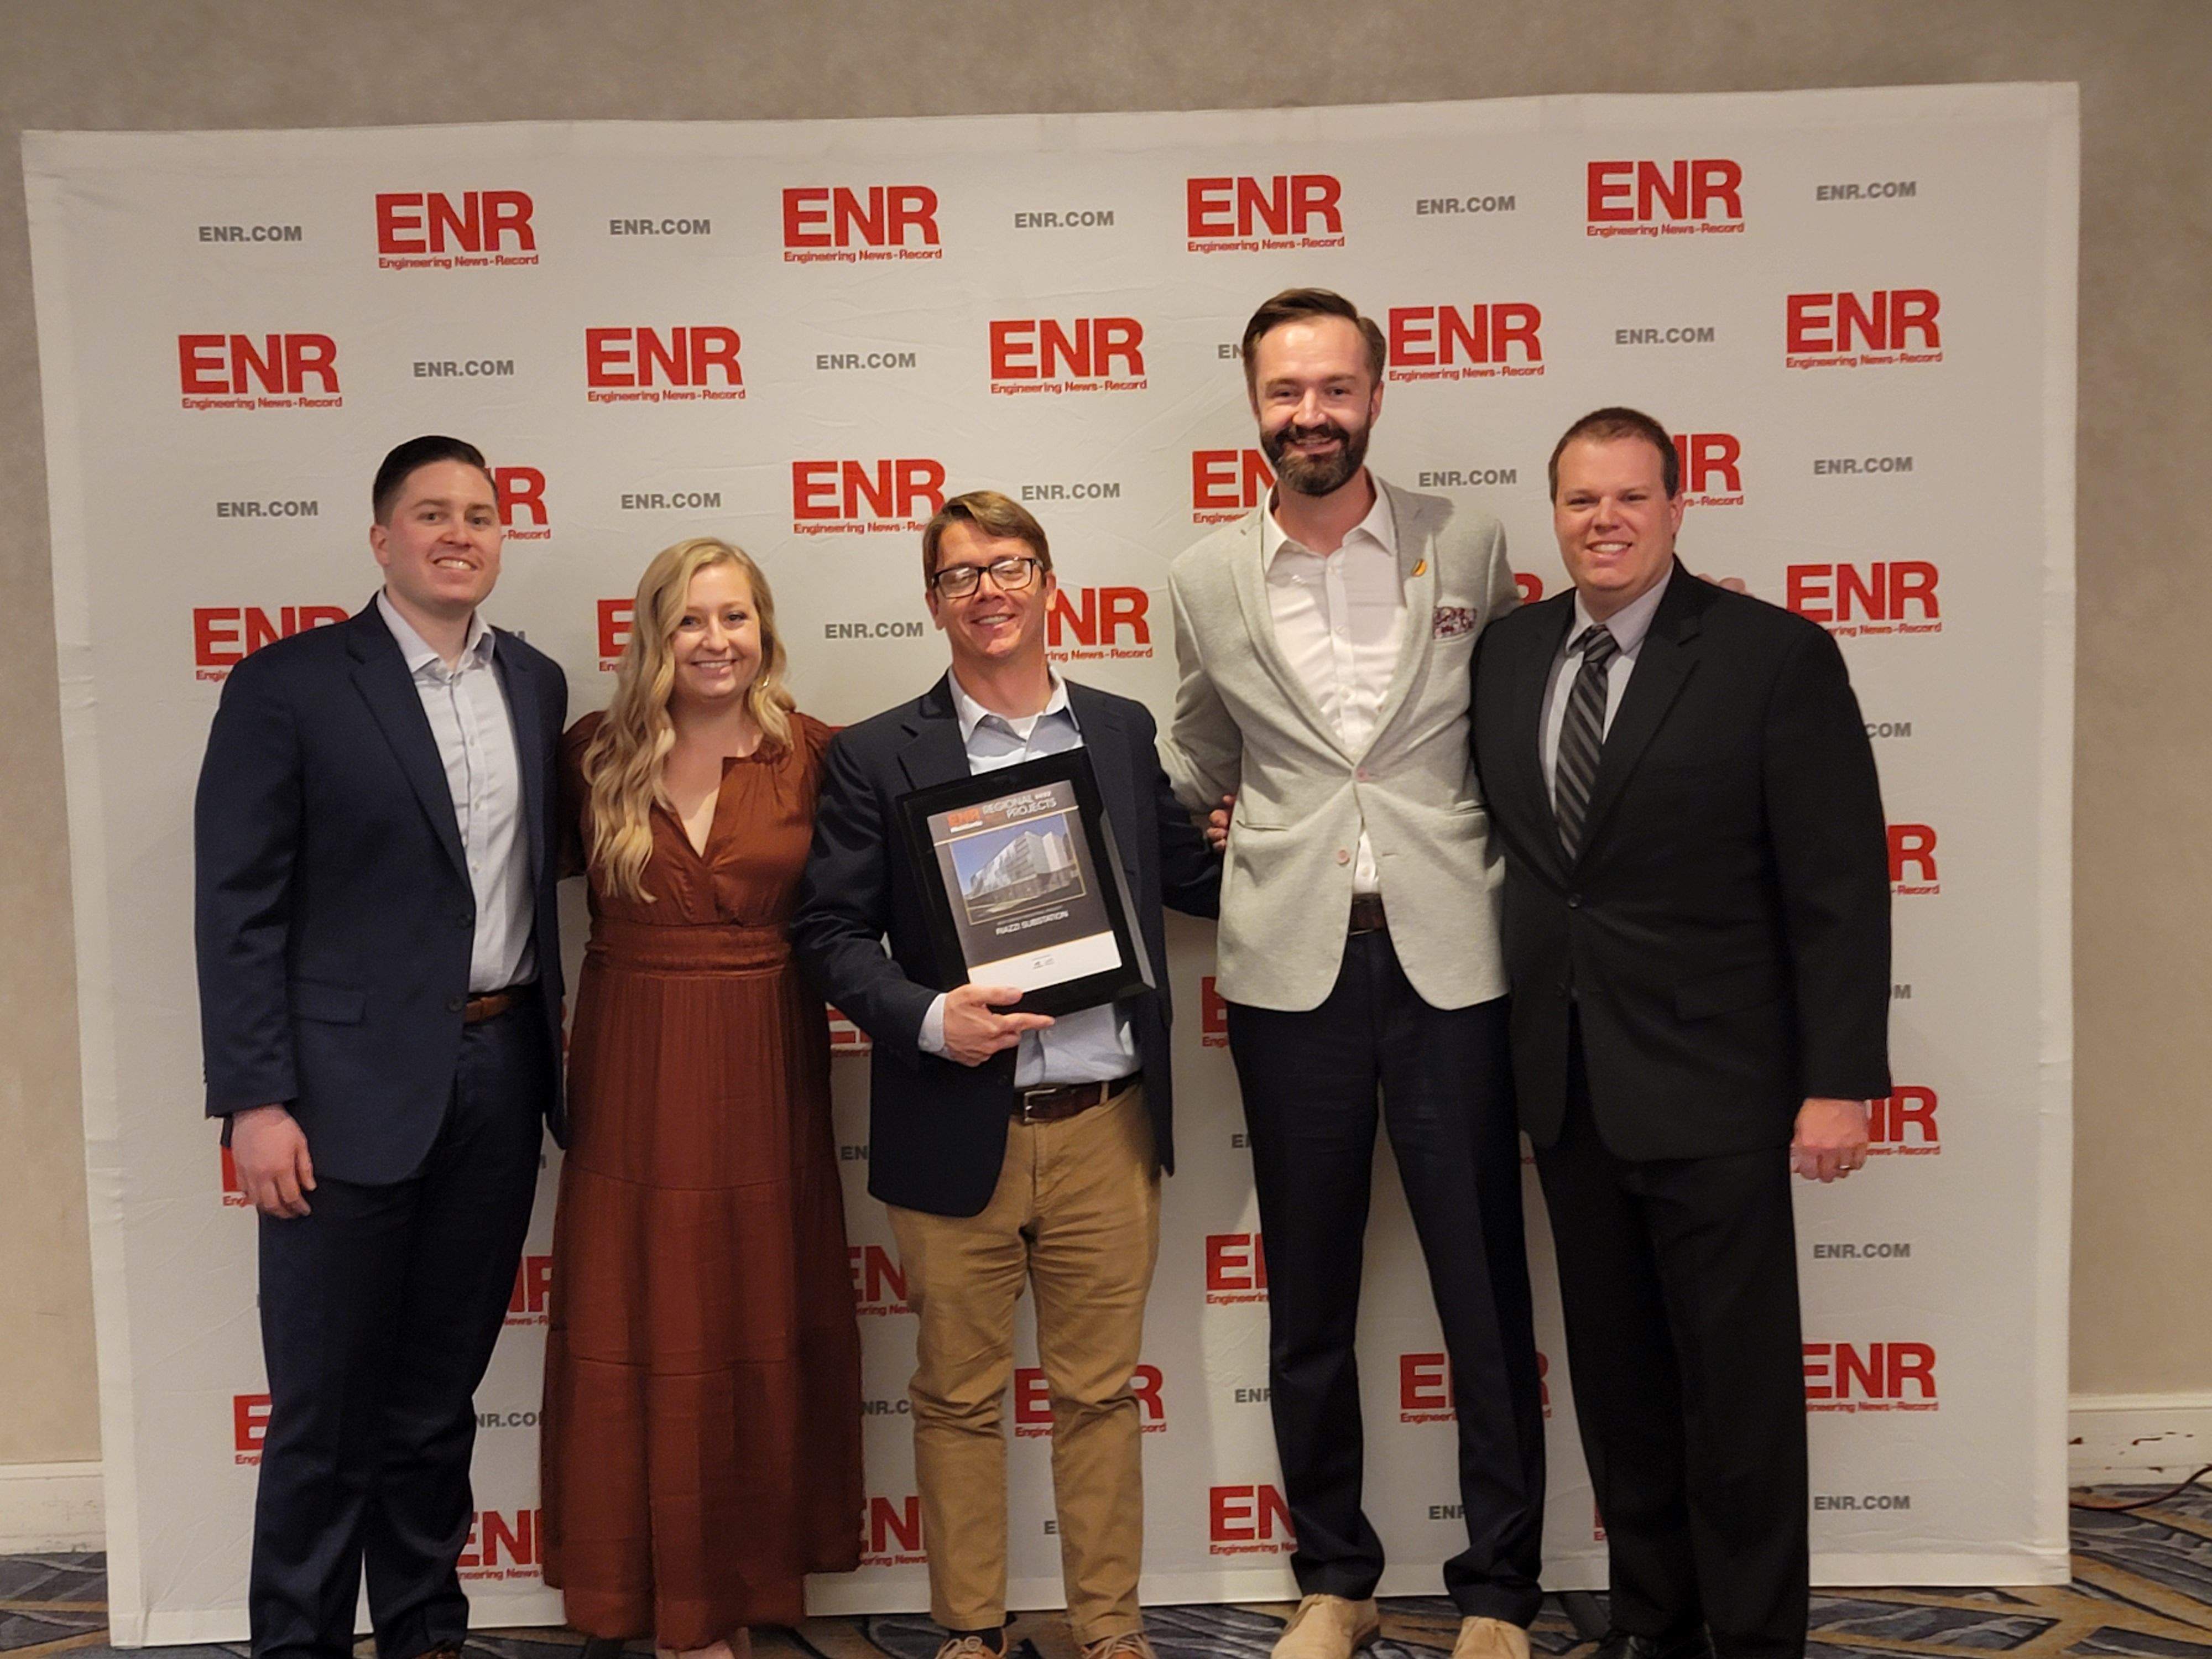 Pictured from left: Pat Burke and Colleen Nicolls from Burns & McDonnell; DLC Senior Project Manager Peter Francis; B&McD's Wally Petrovic and Brad Johnston accept the "MidAtlantic Project of the Year" award at the Engineer News-Record's Regional Best Projects Awards in Baltimore, Md. on Tuesday, October 25, 2022.